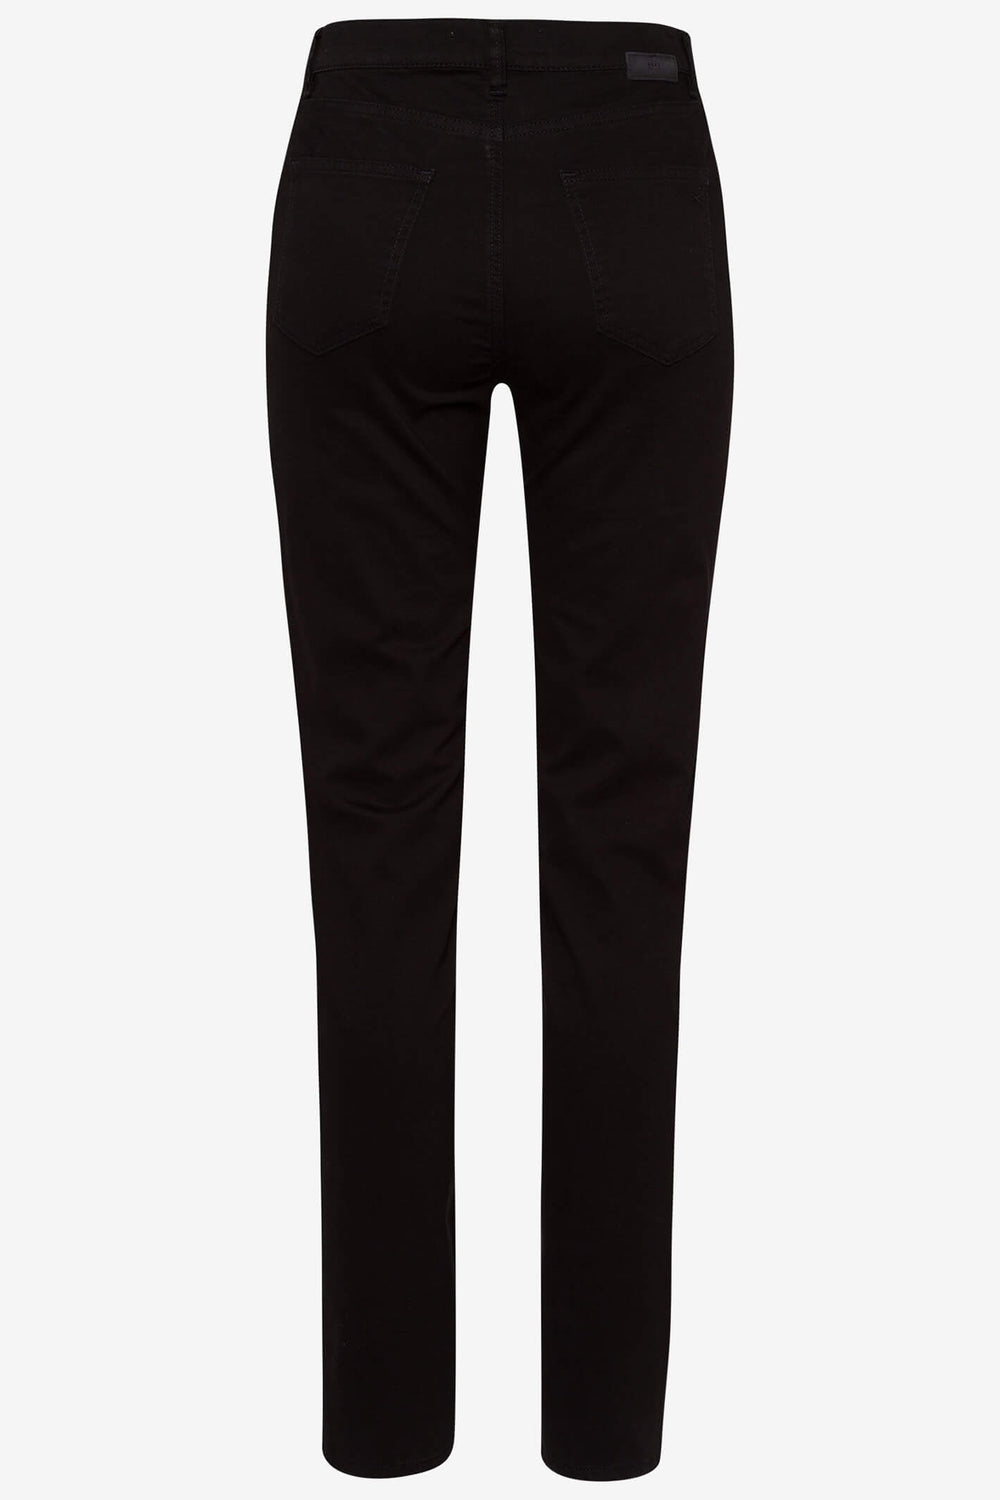 Brax Mary 79-1754 02 Black Thermo Jeans - Shirley Allum Boutique